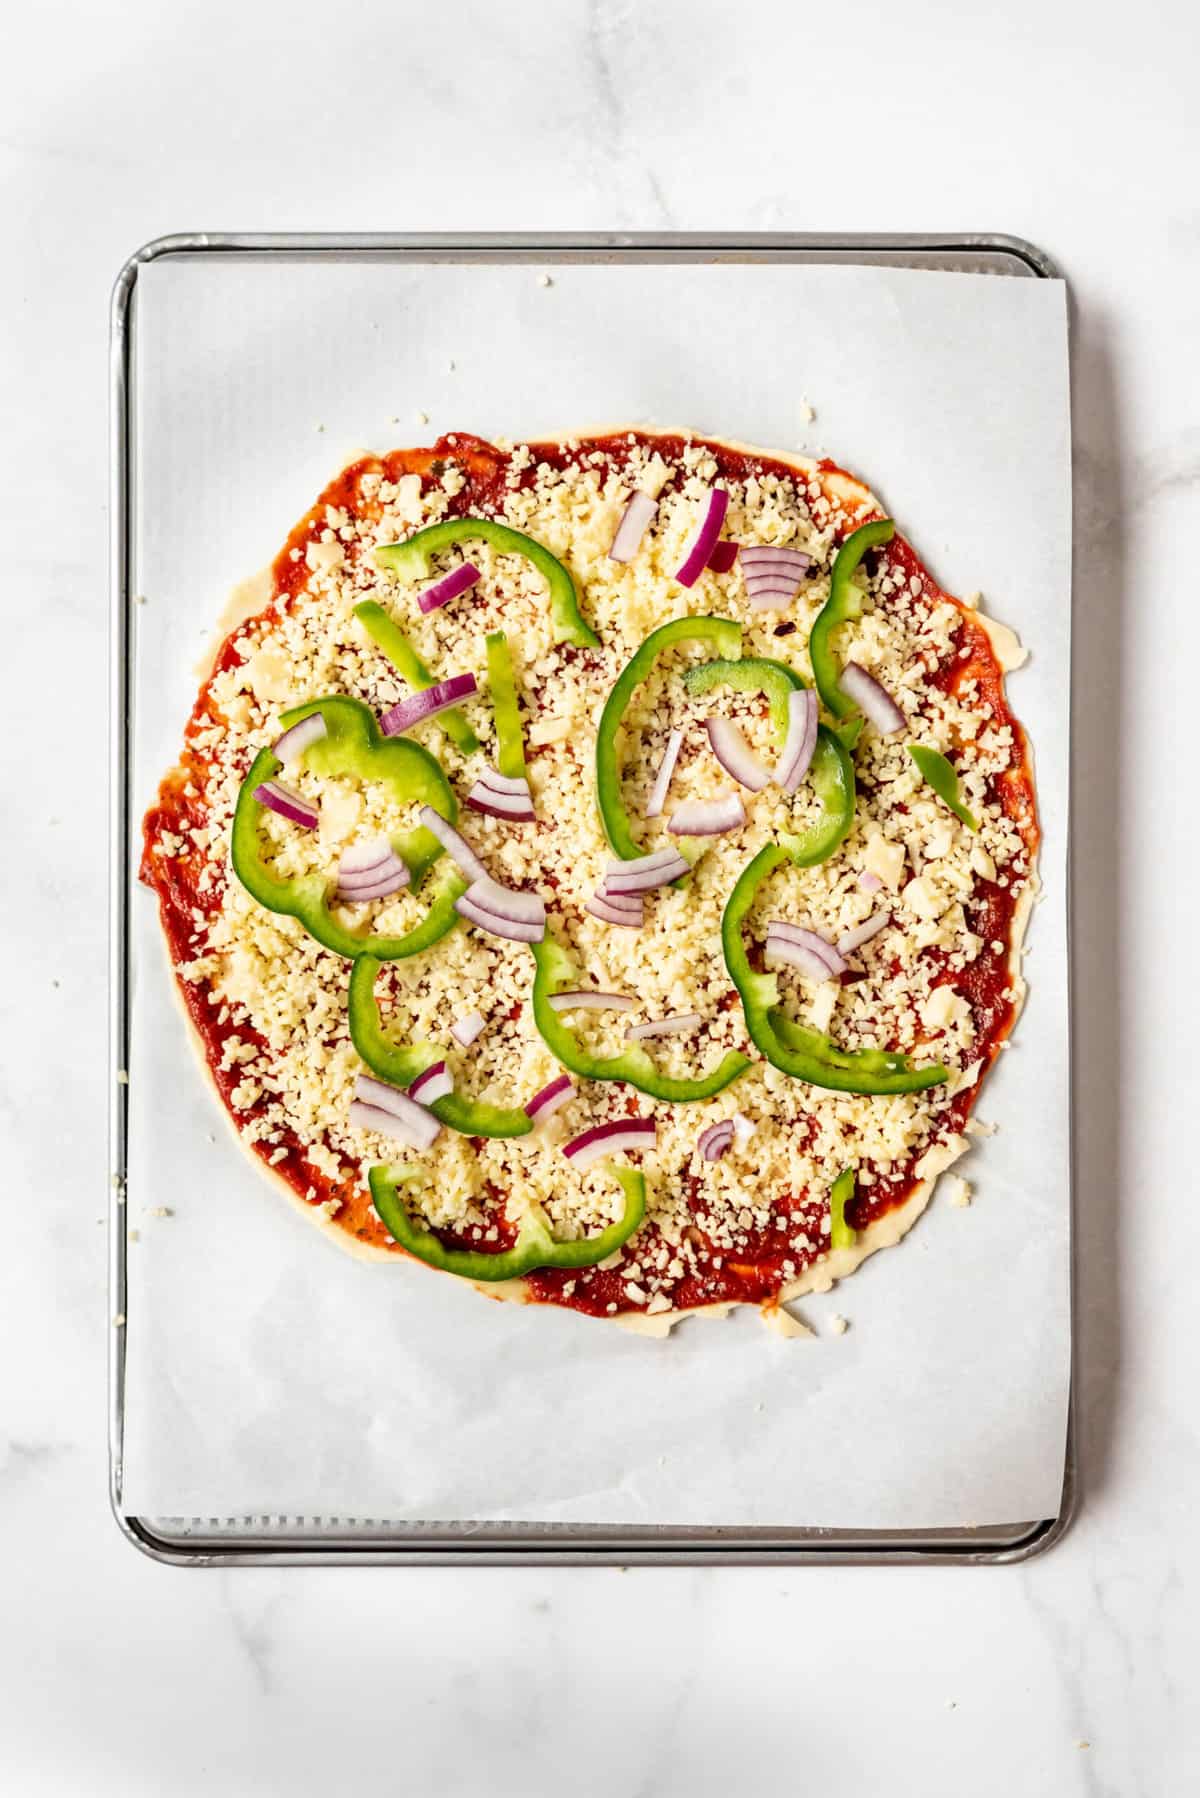 Sprinkled cheese, sliced green bell peppers, and sliced red onions on a pizza crust with sauce.